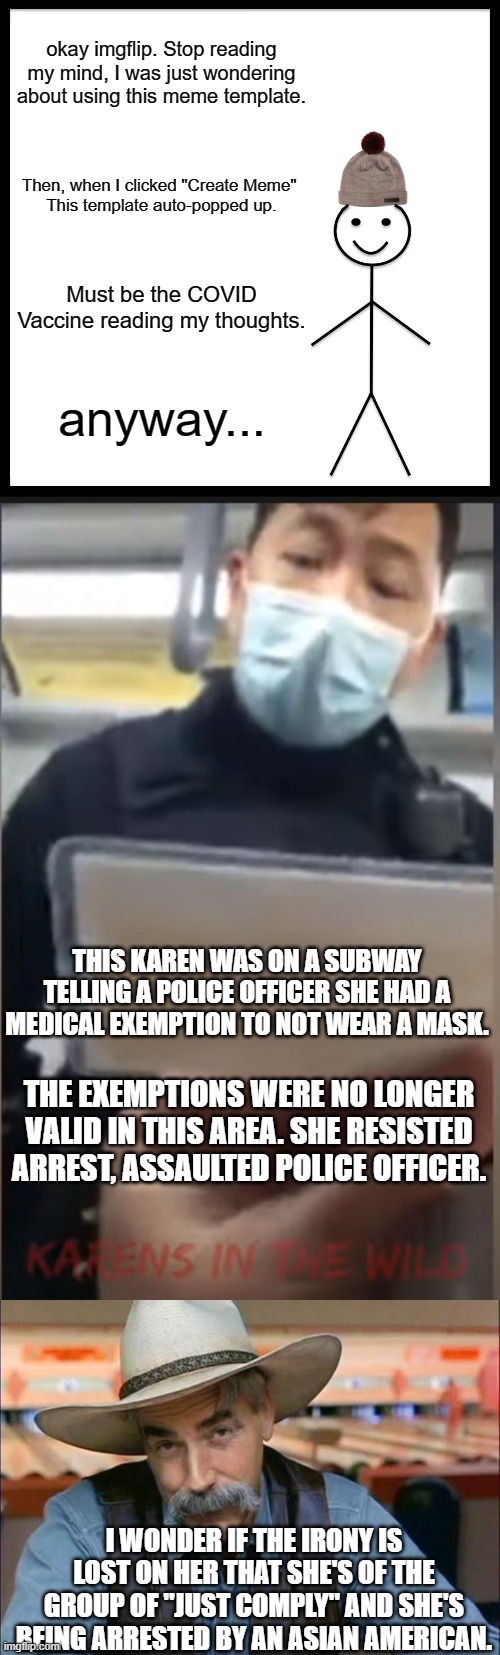 Sweet, delicious, wonderful irony. | okay imgflip. Stop reading my mind, I was just wondering about using this meme template. Then, when I clicked "Create Meme" 
This template auto-popped up. Must be the COVID Vaccine reading my thoughts. anyway... THIS KAREN WAS ON A SUBWAY TELLING A POLICE OFFICER SHE HAD A MEDICAL EXEMPTION TO NOT WEAR A MASK. THE EXEMPTIONS WERE NO LONGER VALID IN THIS AREA. SHE RESISTED ARREST, ASSAULTED POLICE OFFICER. I WONDER IF THE IRONY IS LOST ON HER THAT SHE'S OF THE GROUP OF "JUST COMPLY" AND SHE'S BEING ARRESTED BY AN ASIAN AMERICAN. | image tagged in memes,be like bill,sam elliott special kind of stupid,karen,covid,justice | made w/ Imgflip meme maker